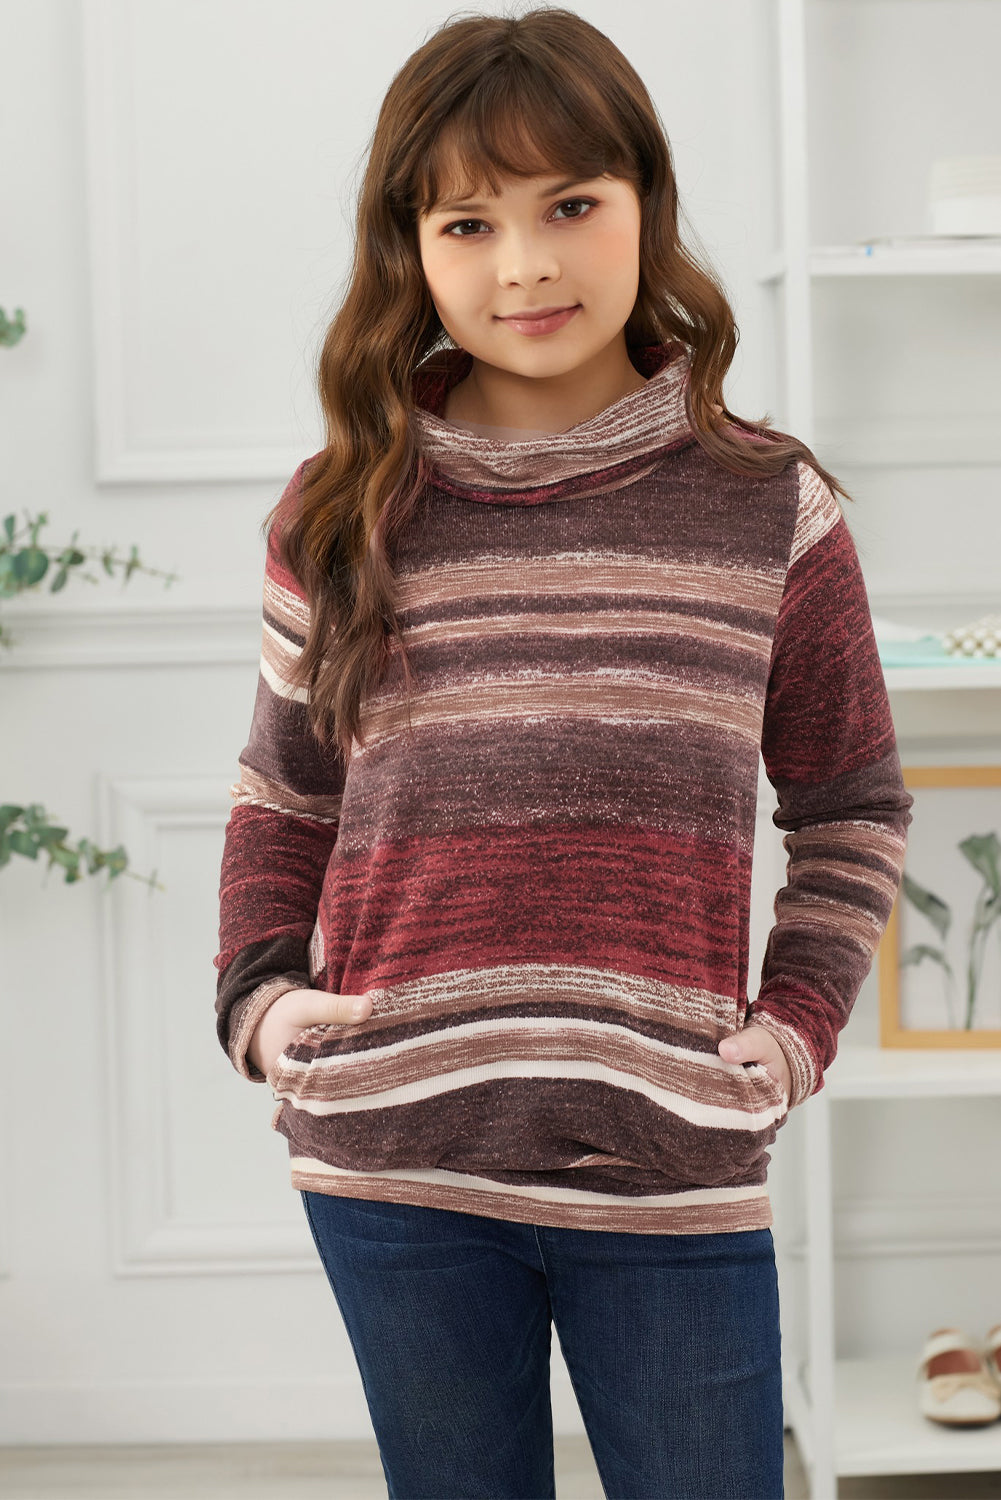 Girls Striped Cowl Neck Top with Pockets-Sweater-PureDesignTees